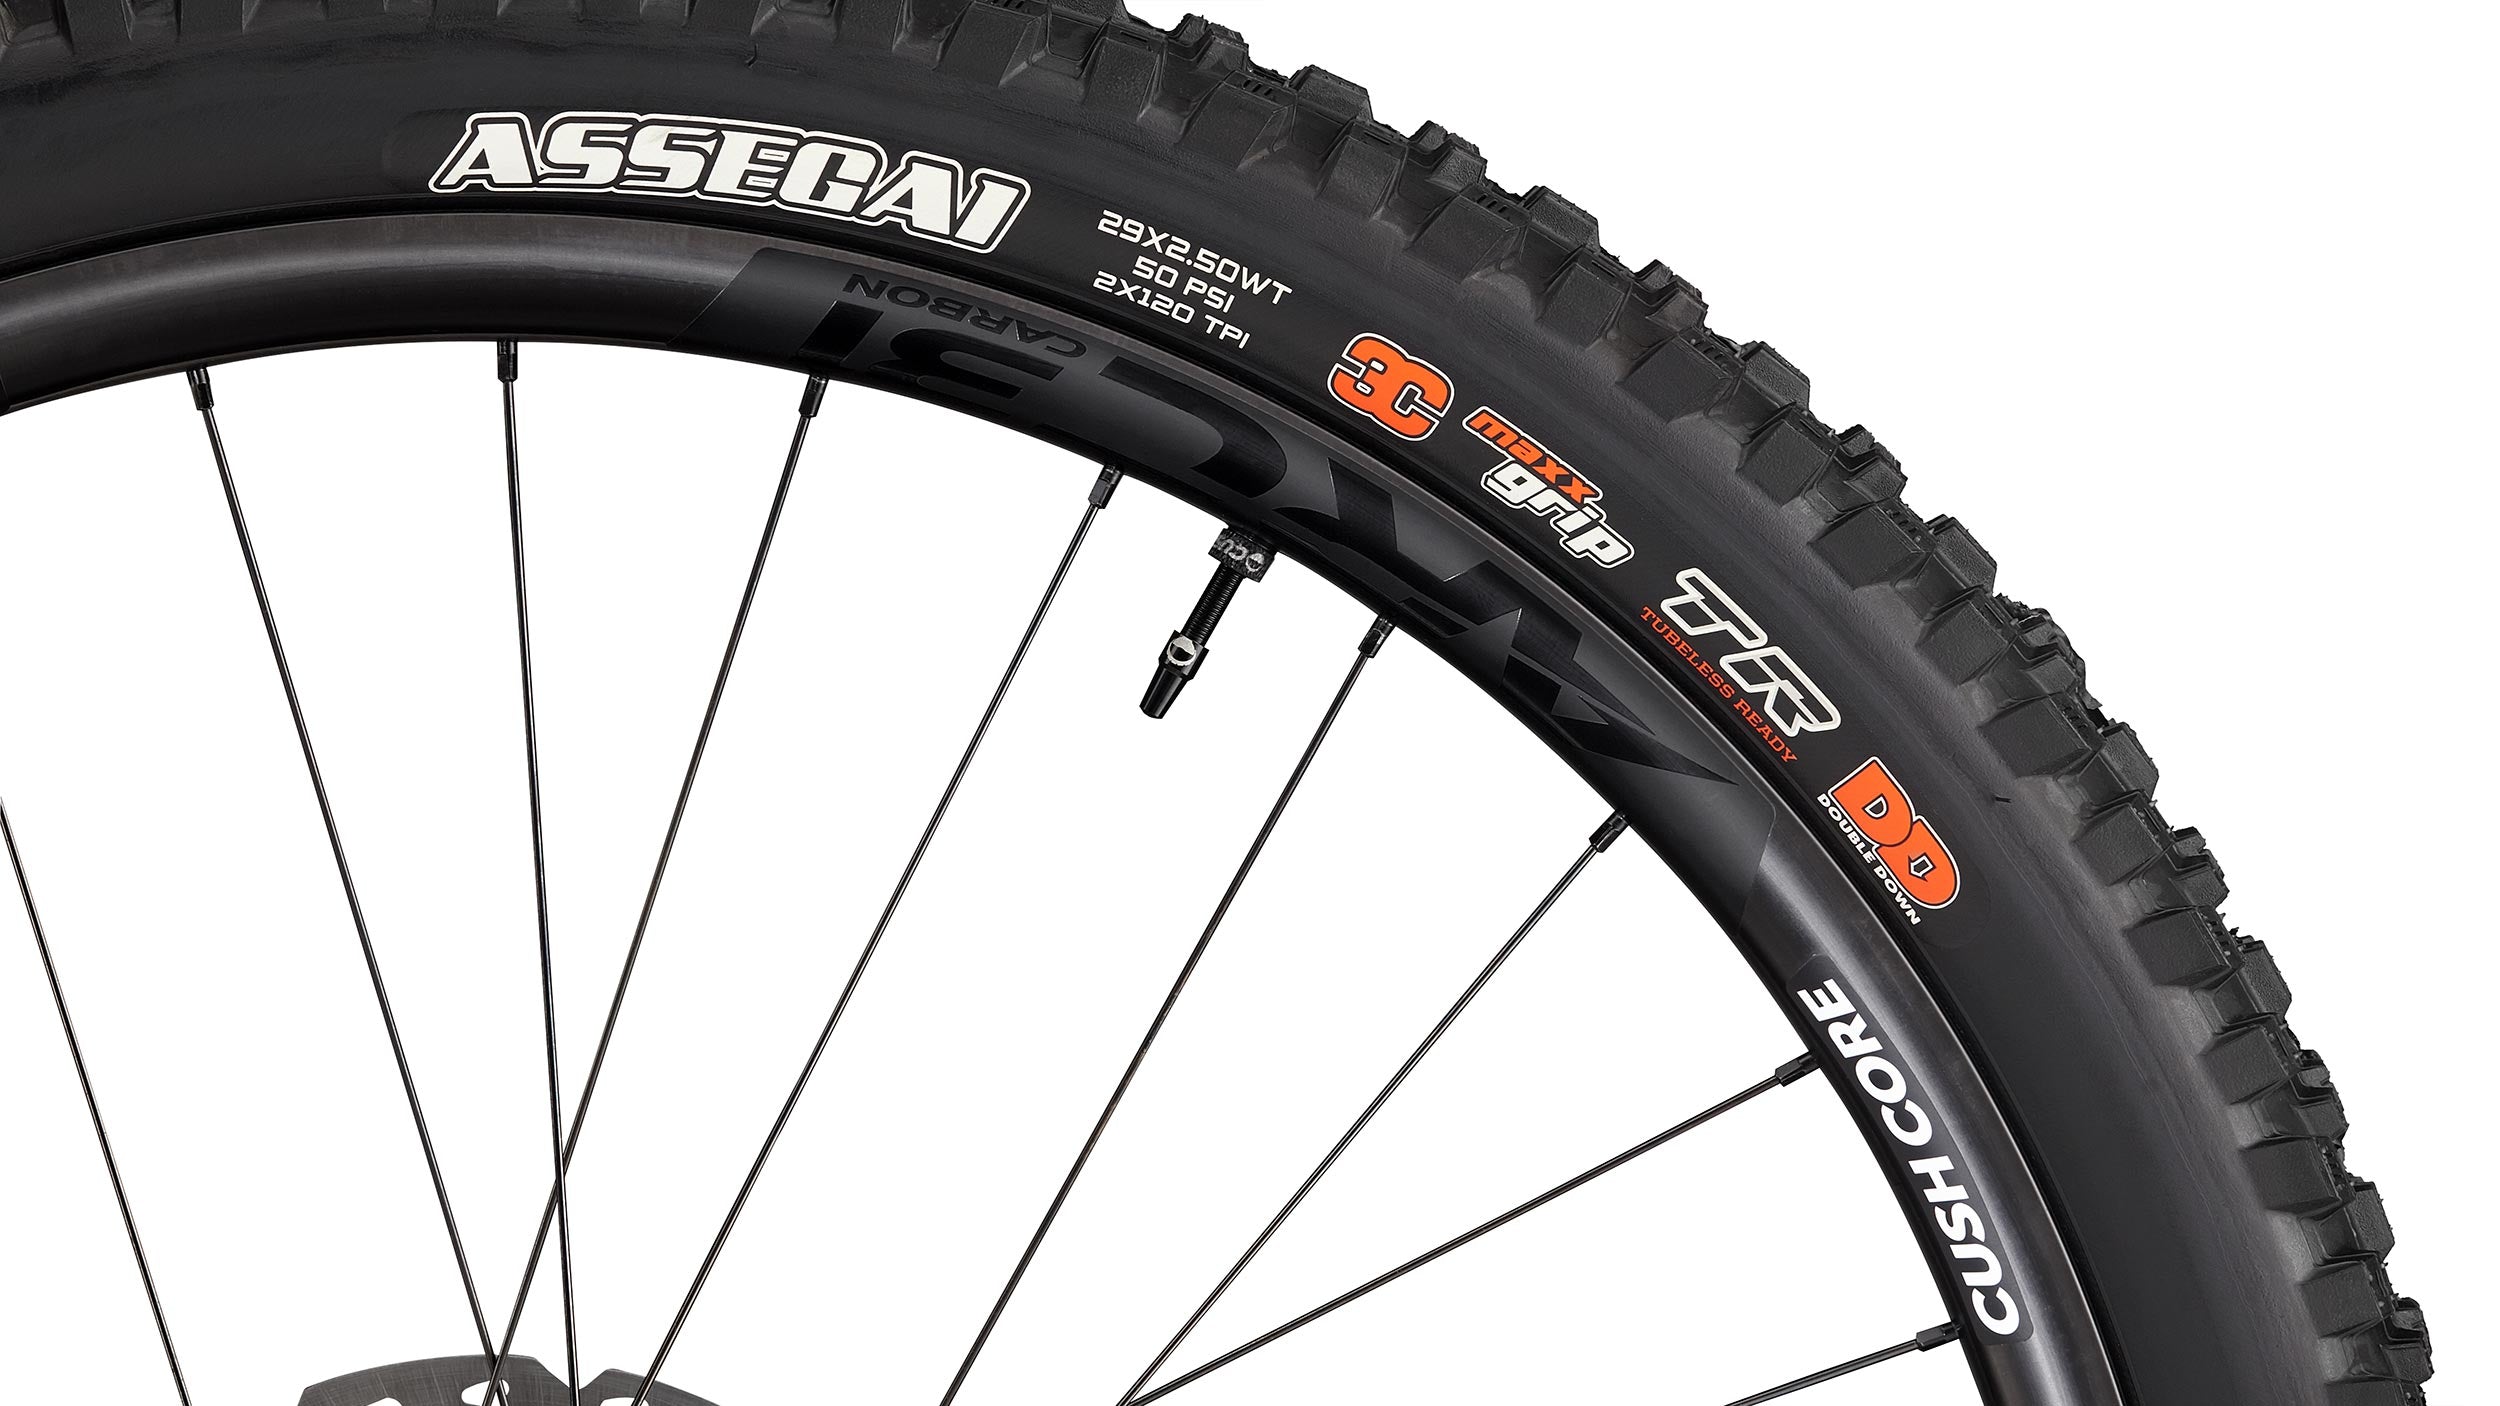 _caption_Experience the ultimate combination of strength, agility, and protection with the RaceFace ARC carbon rims. When equipped with Maxxis DoubleDown tires and CushCore XC tire inserts, you'll enjoy enhanced traction, superior support, and unmatched responsiveness.